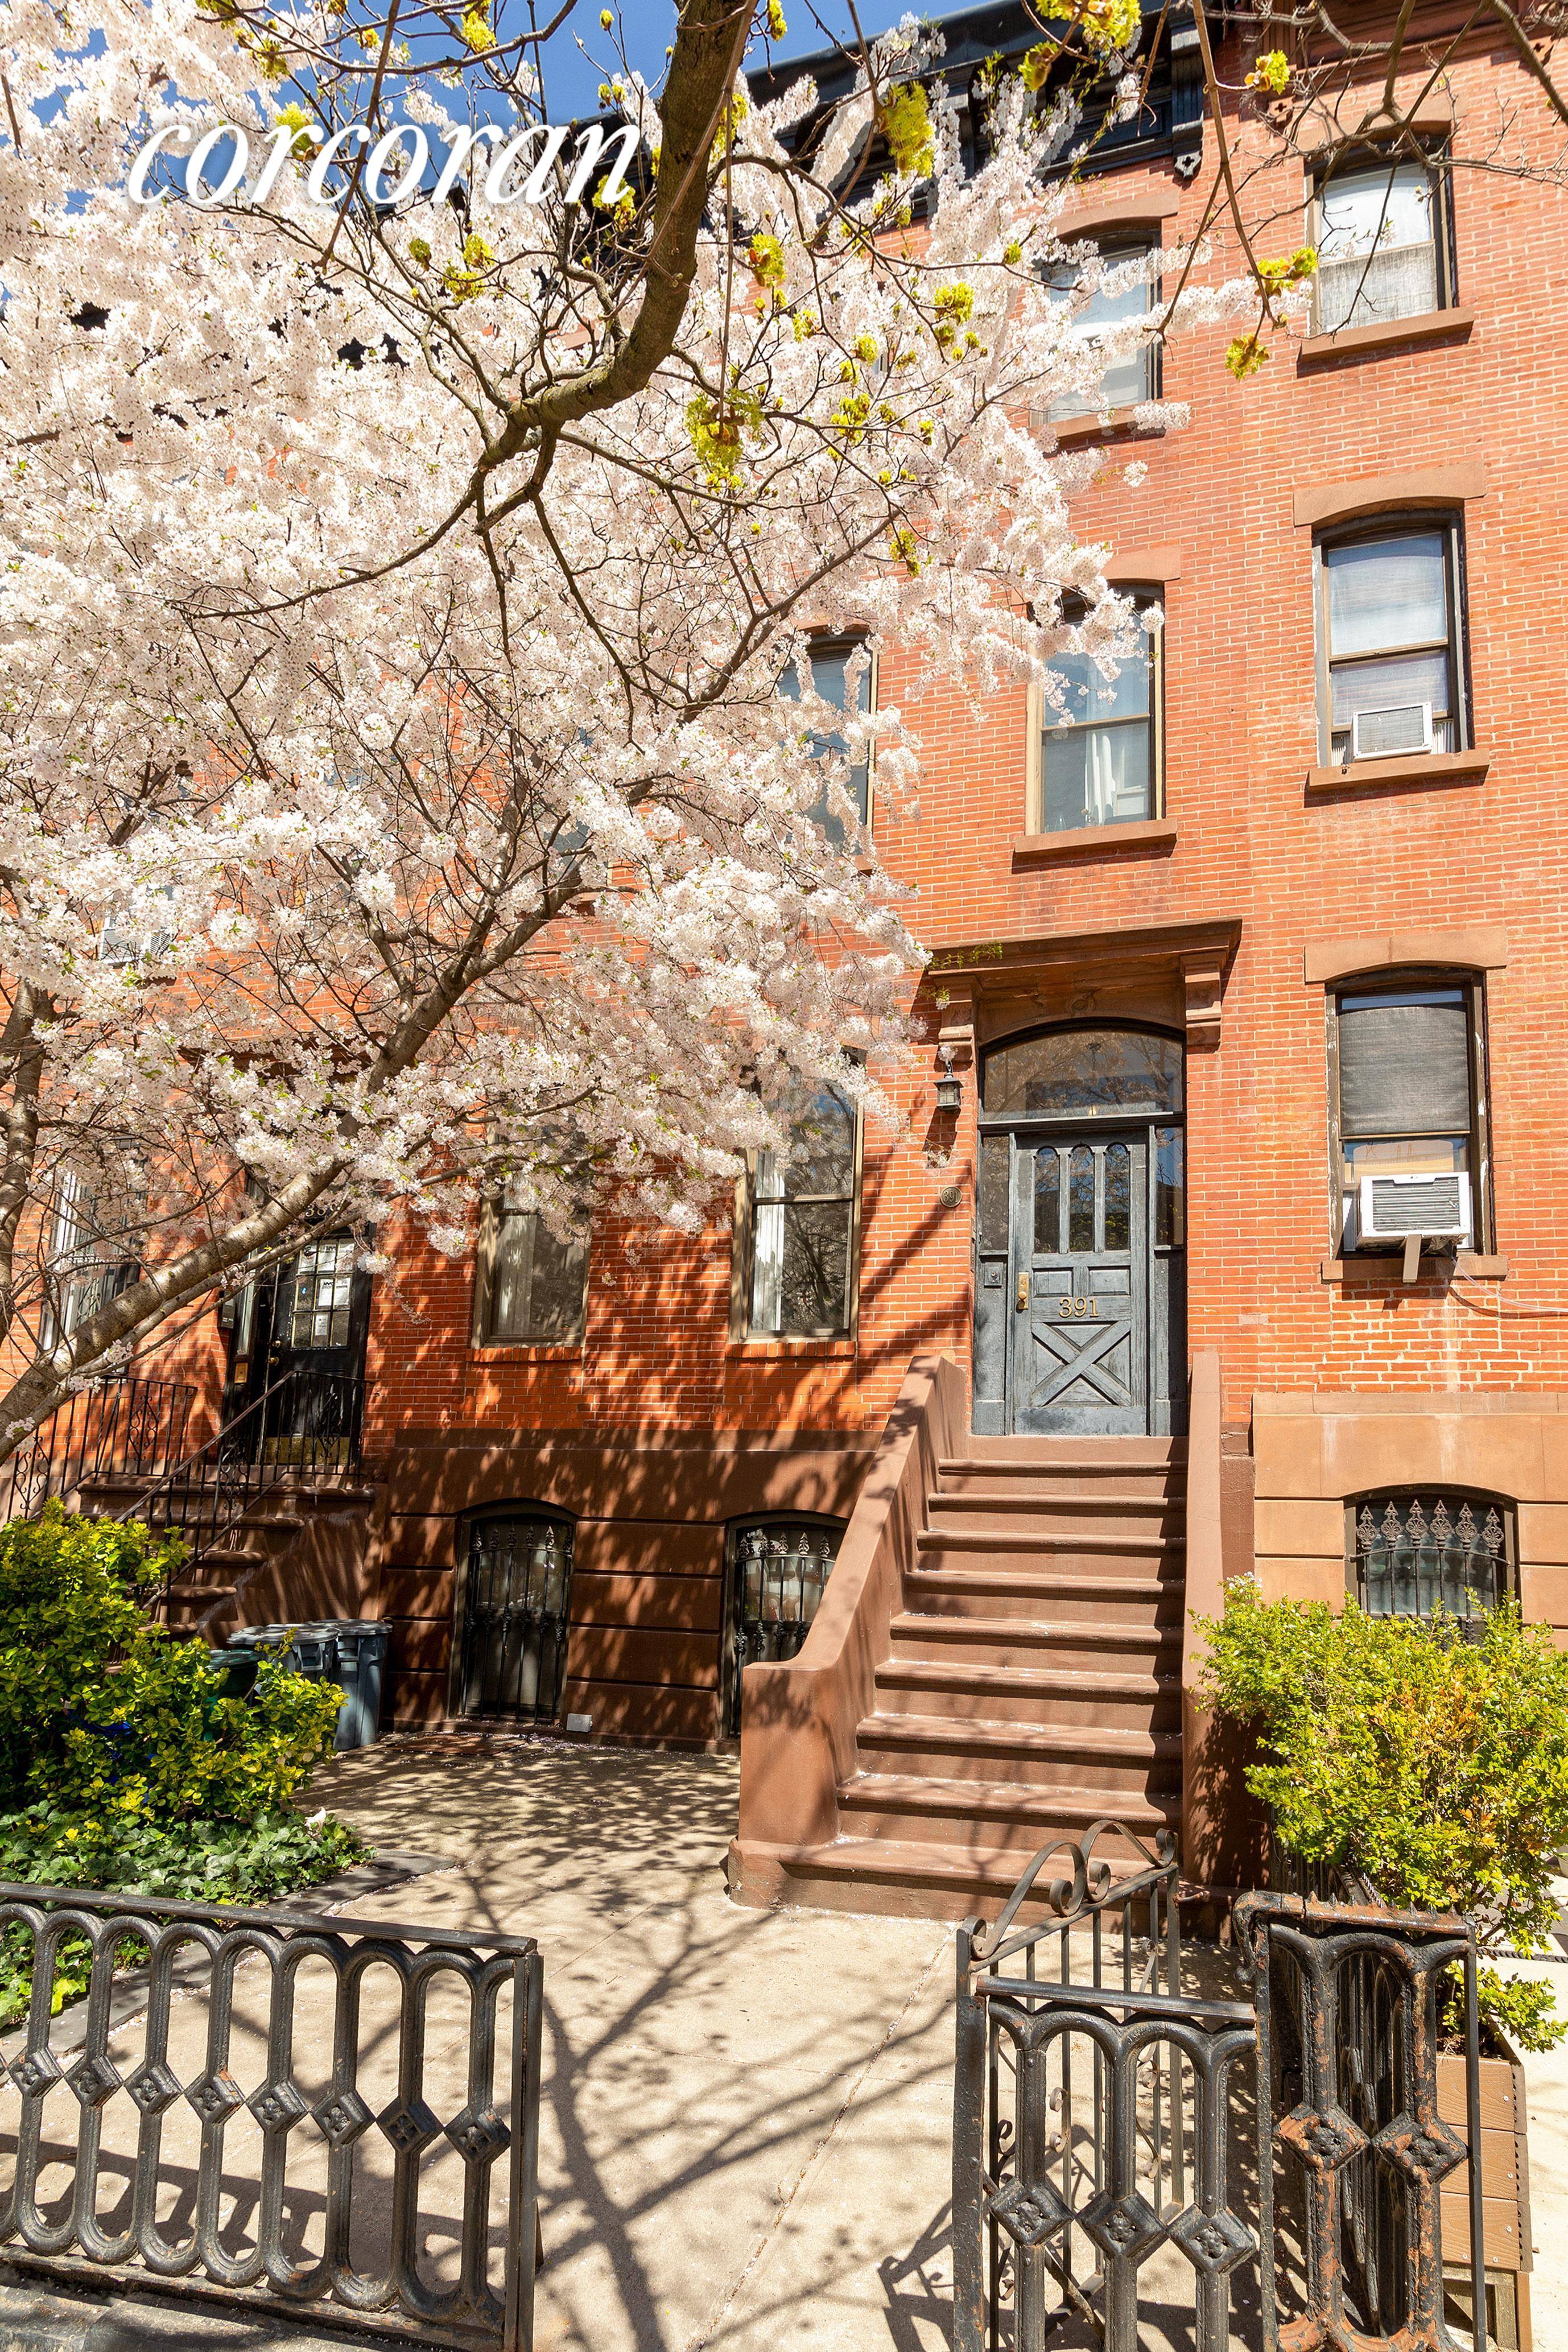 BOOM ! ! ! Big Time ! ! Rare Opportunity to own this 4 Family 4 Story Basement, Brick and Brownstone building in Prime Center Park Slope.